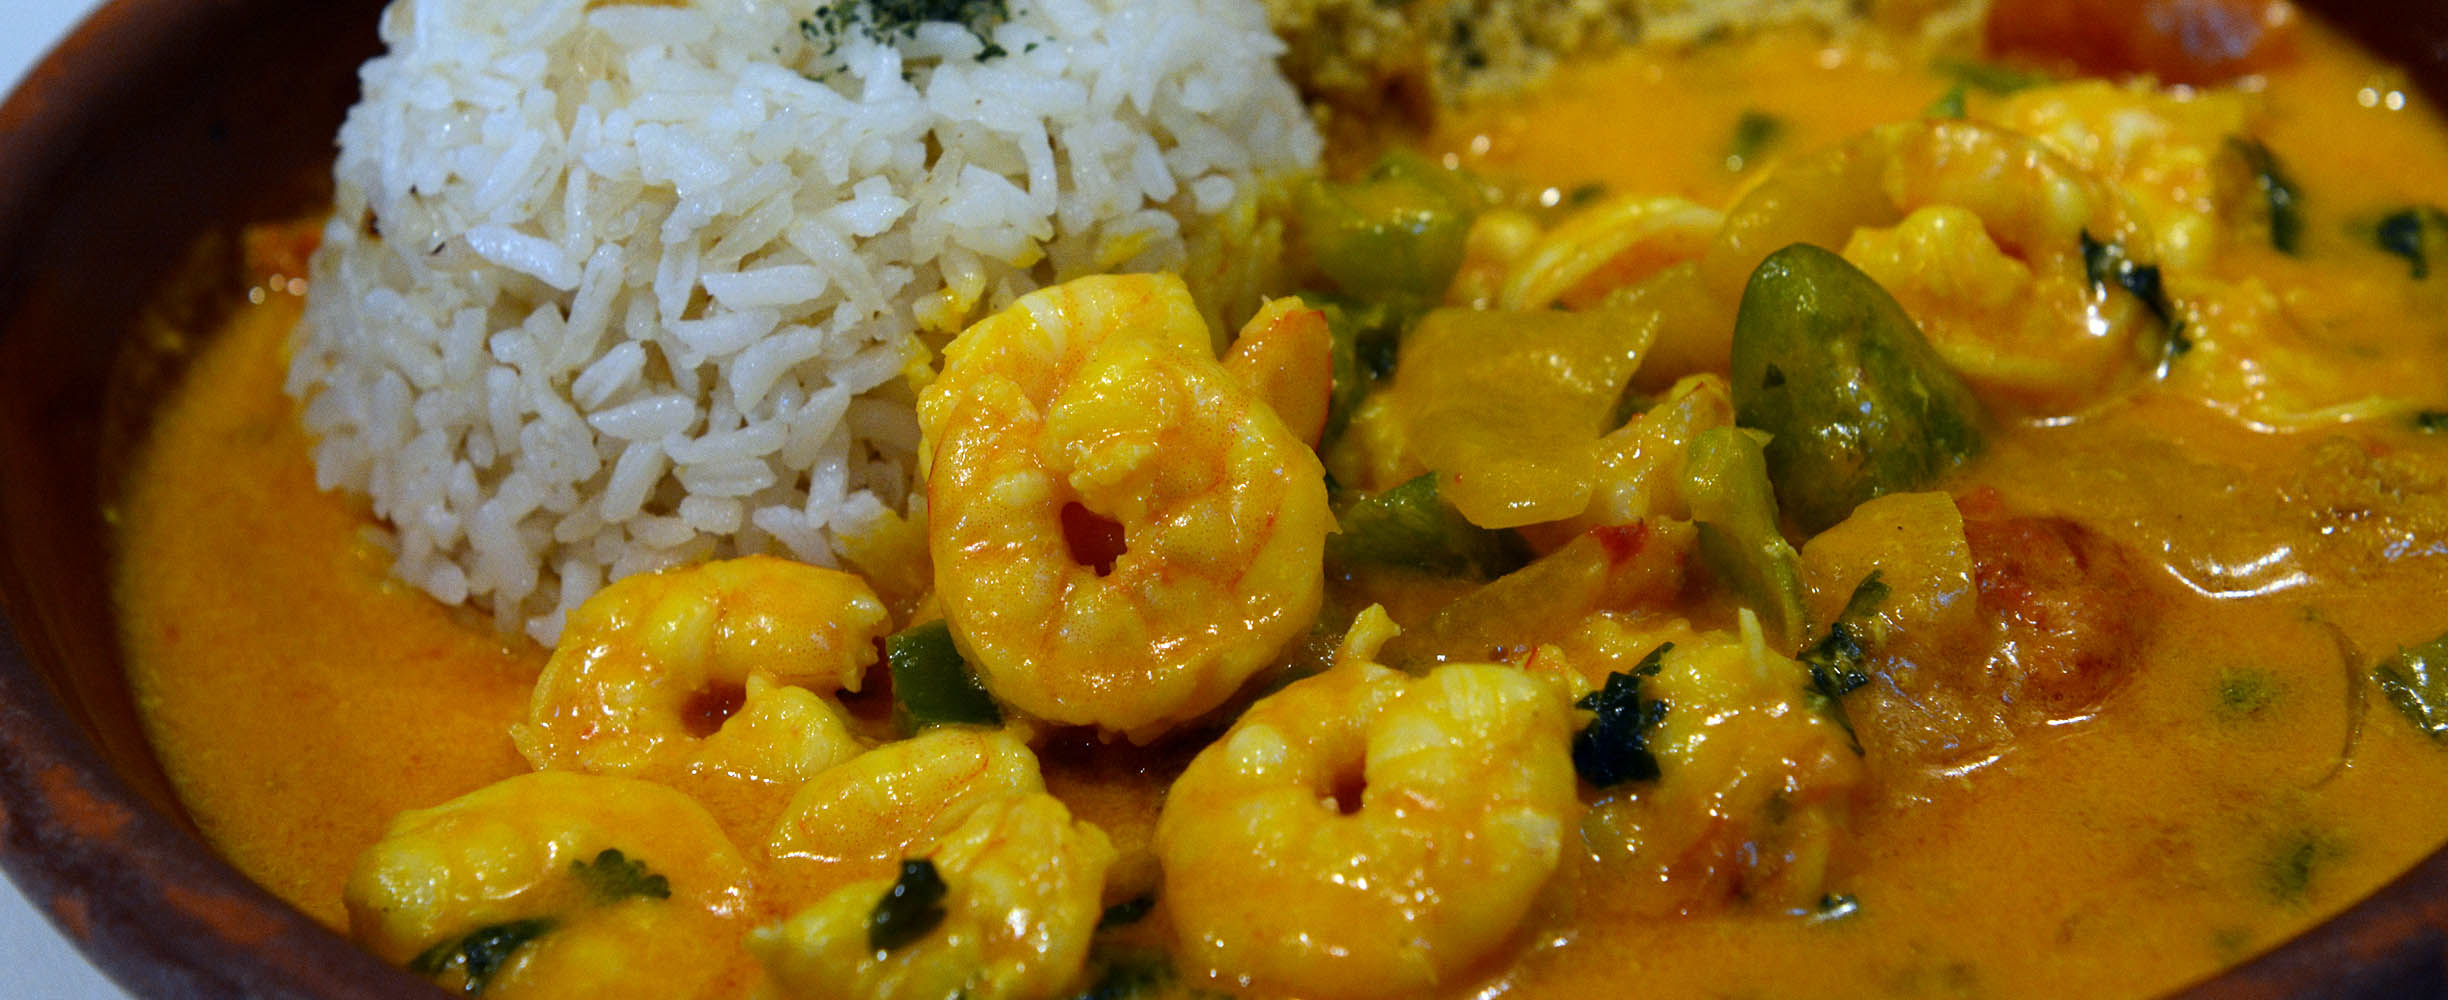 Shrimps with coconut and rice is a typical Brazilian dish.